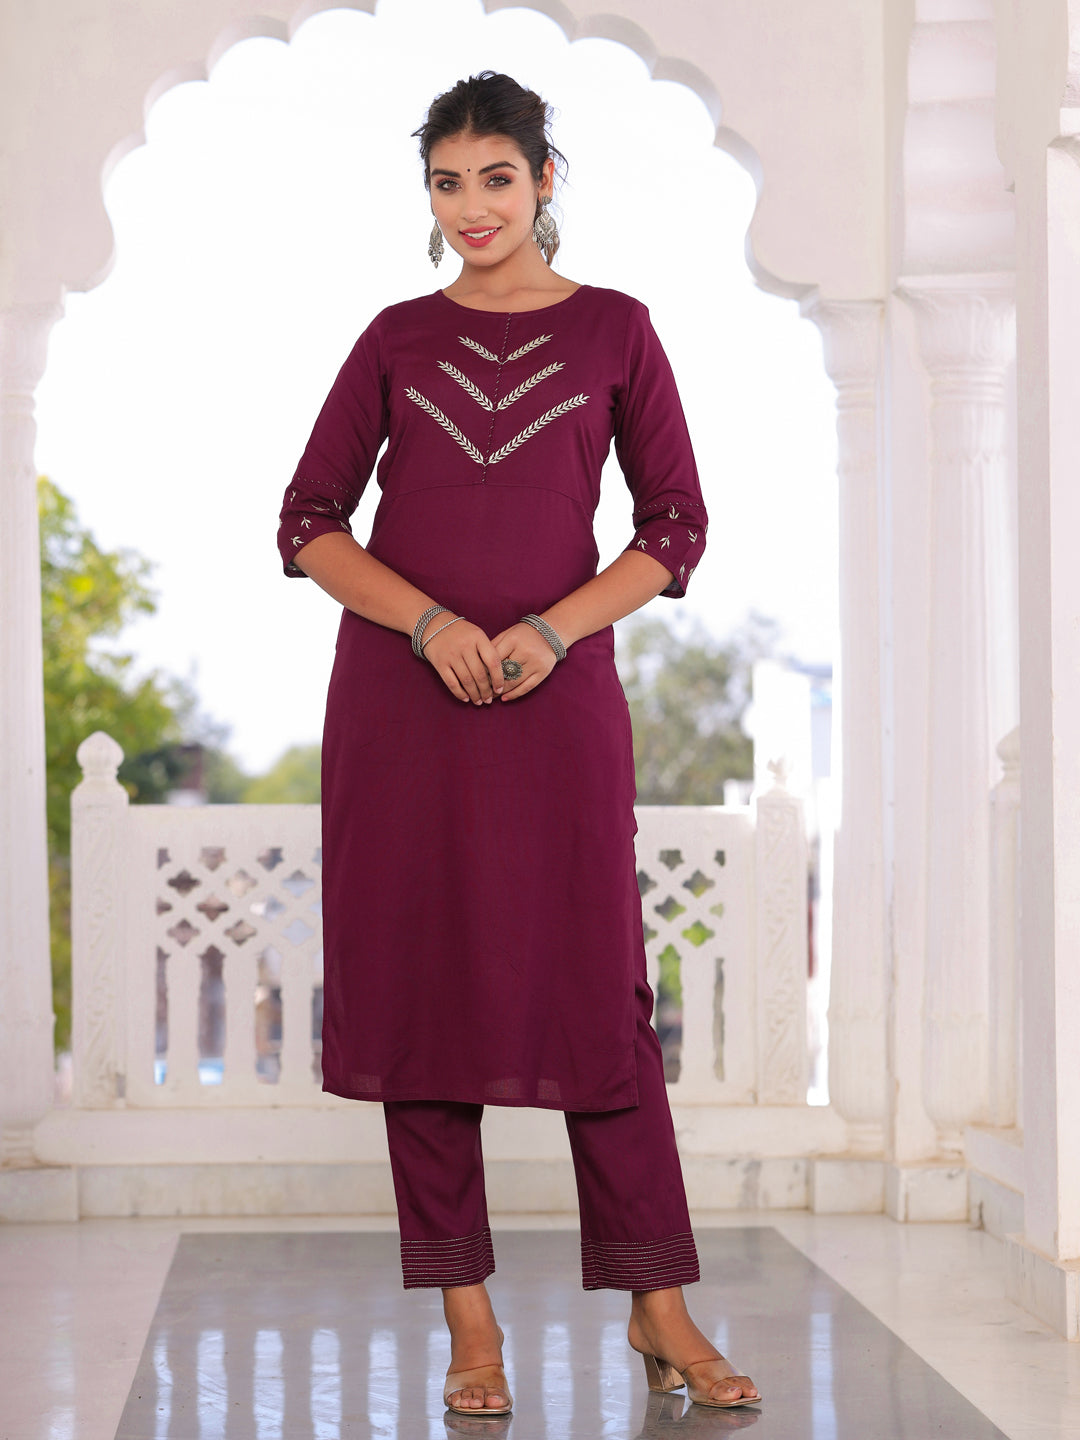 Buy Stylish Maroon kurti with textured fabric by HisAndHer at Amazon.in